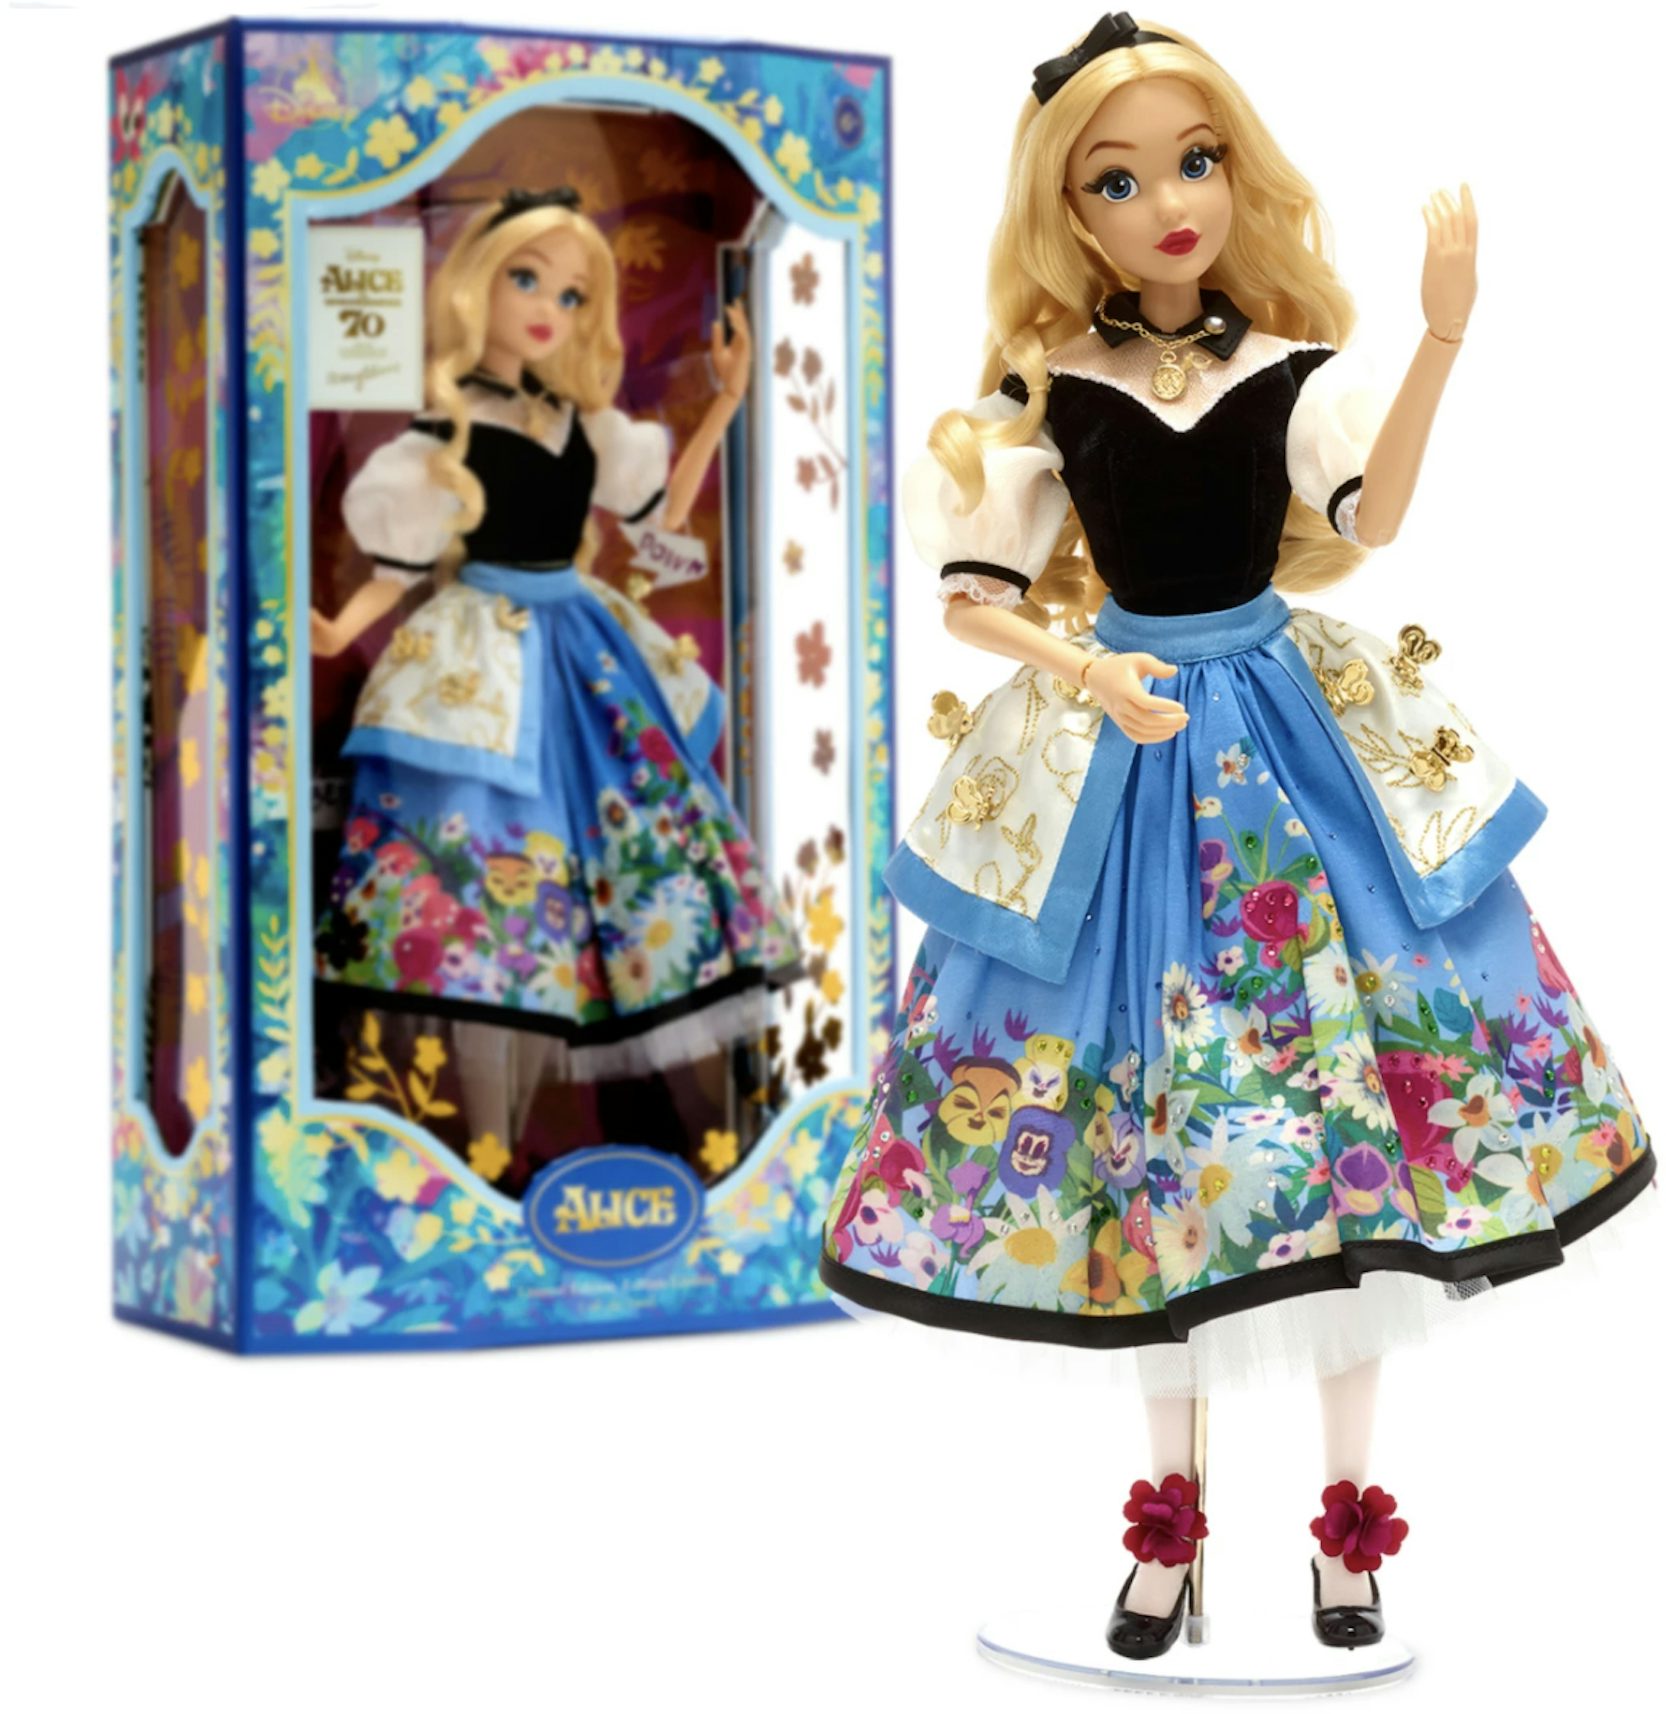 https://images.stockx.com/images/Disney-Alice-in-Wonderland-by-Mary-Blair-Limited-Edition-Doll.jpg?fit=fill&bg=FFFFFF&w=1200&h=857&fm=jpg&auto=compress&dpr=2&trim=color&updated_at=1628291029&q=60